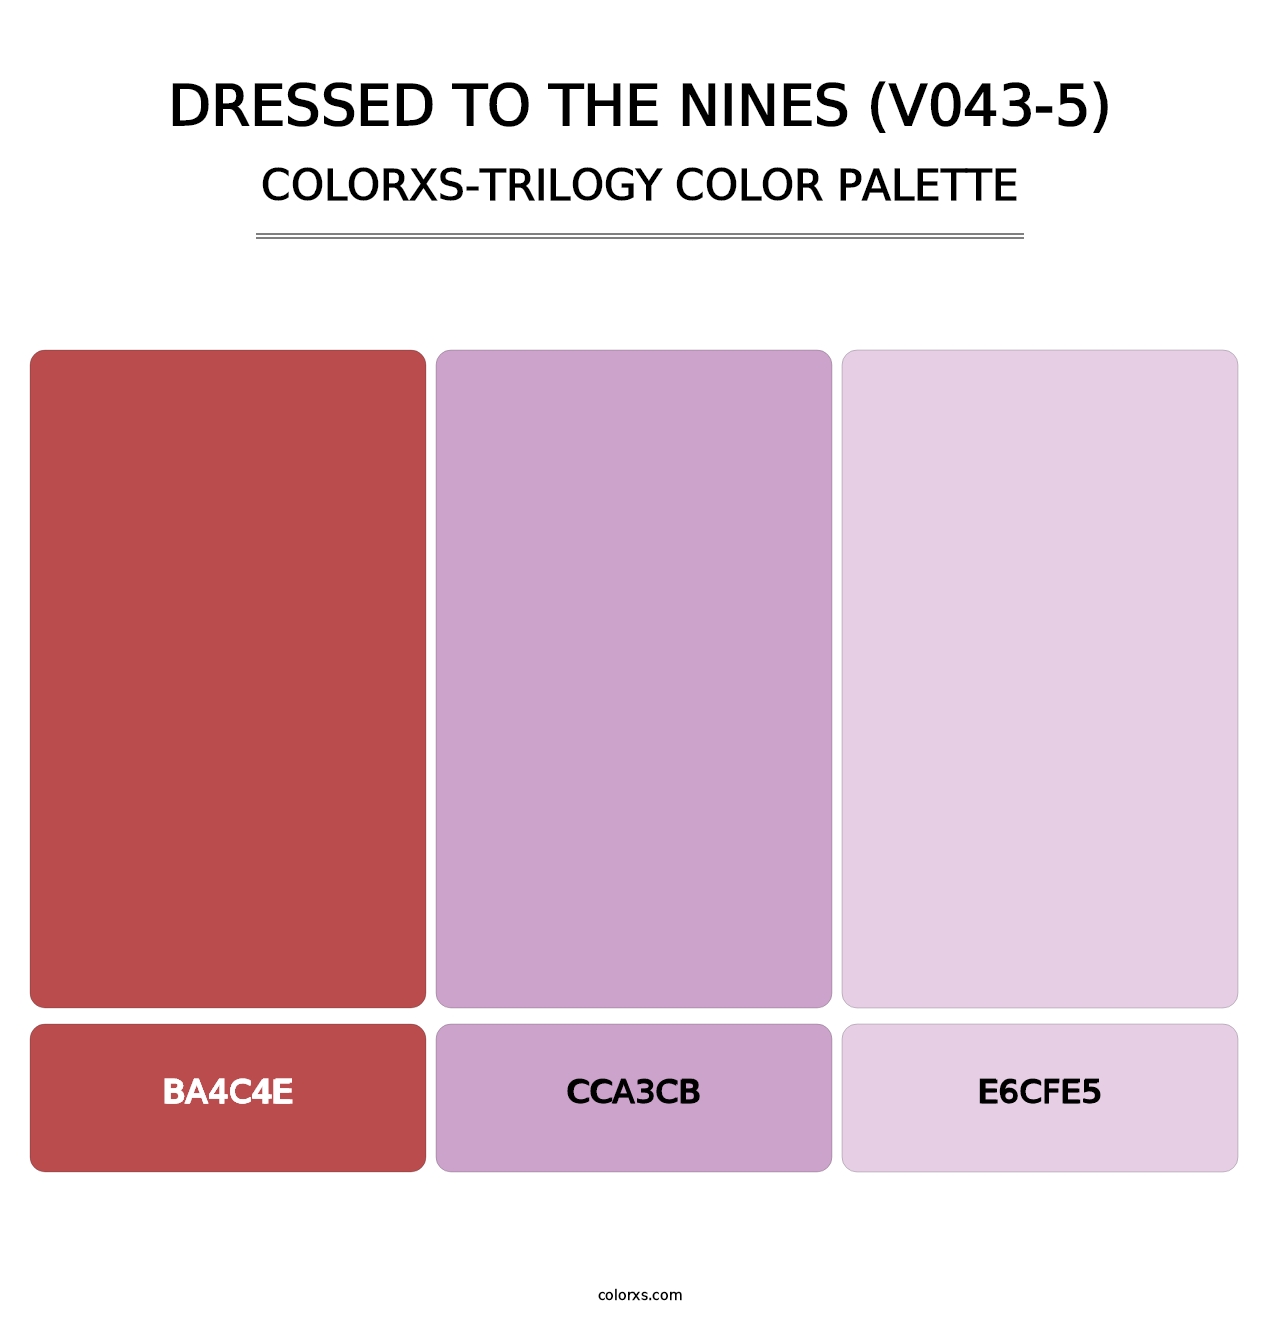 Dressed to the Nines (V043-5) - Colorxs Trilogy Palette